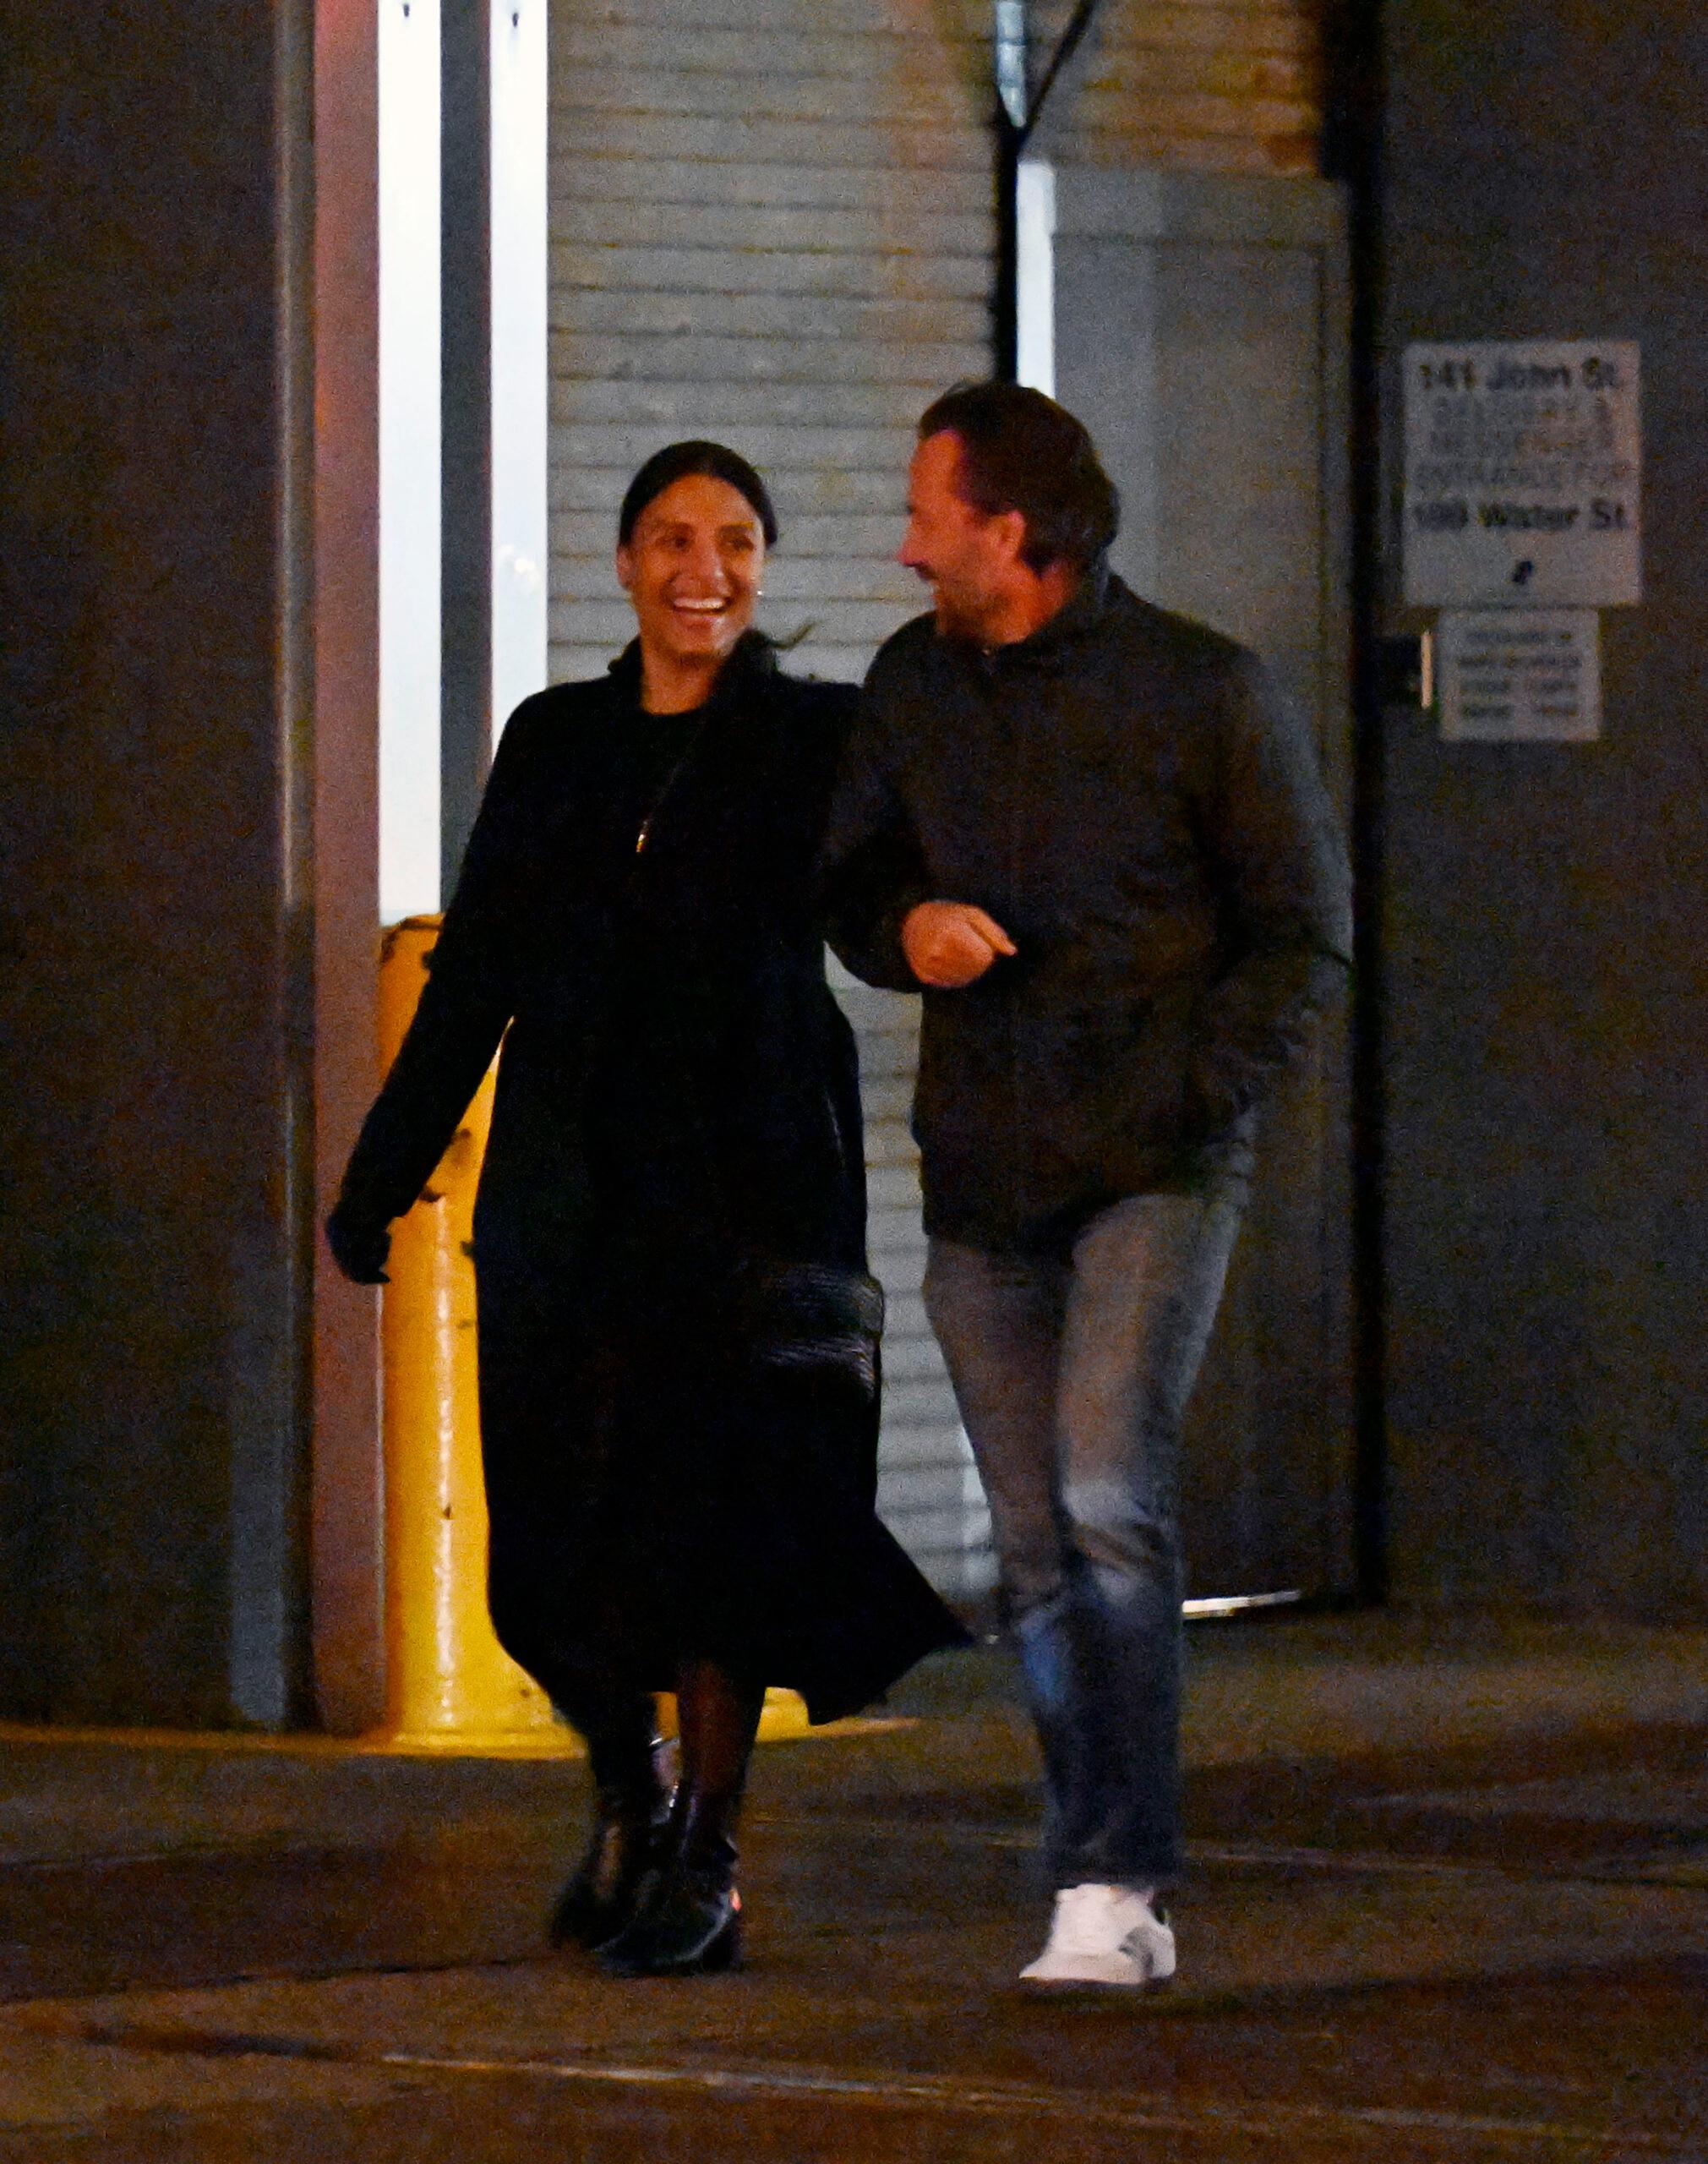 Andrew Shue and Marilee Fiebig walk home smiling after dinner in NYC.